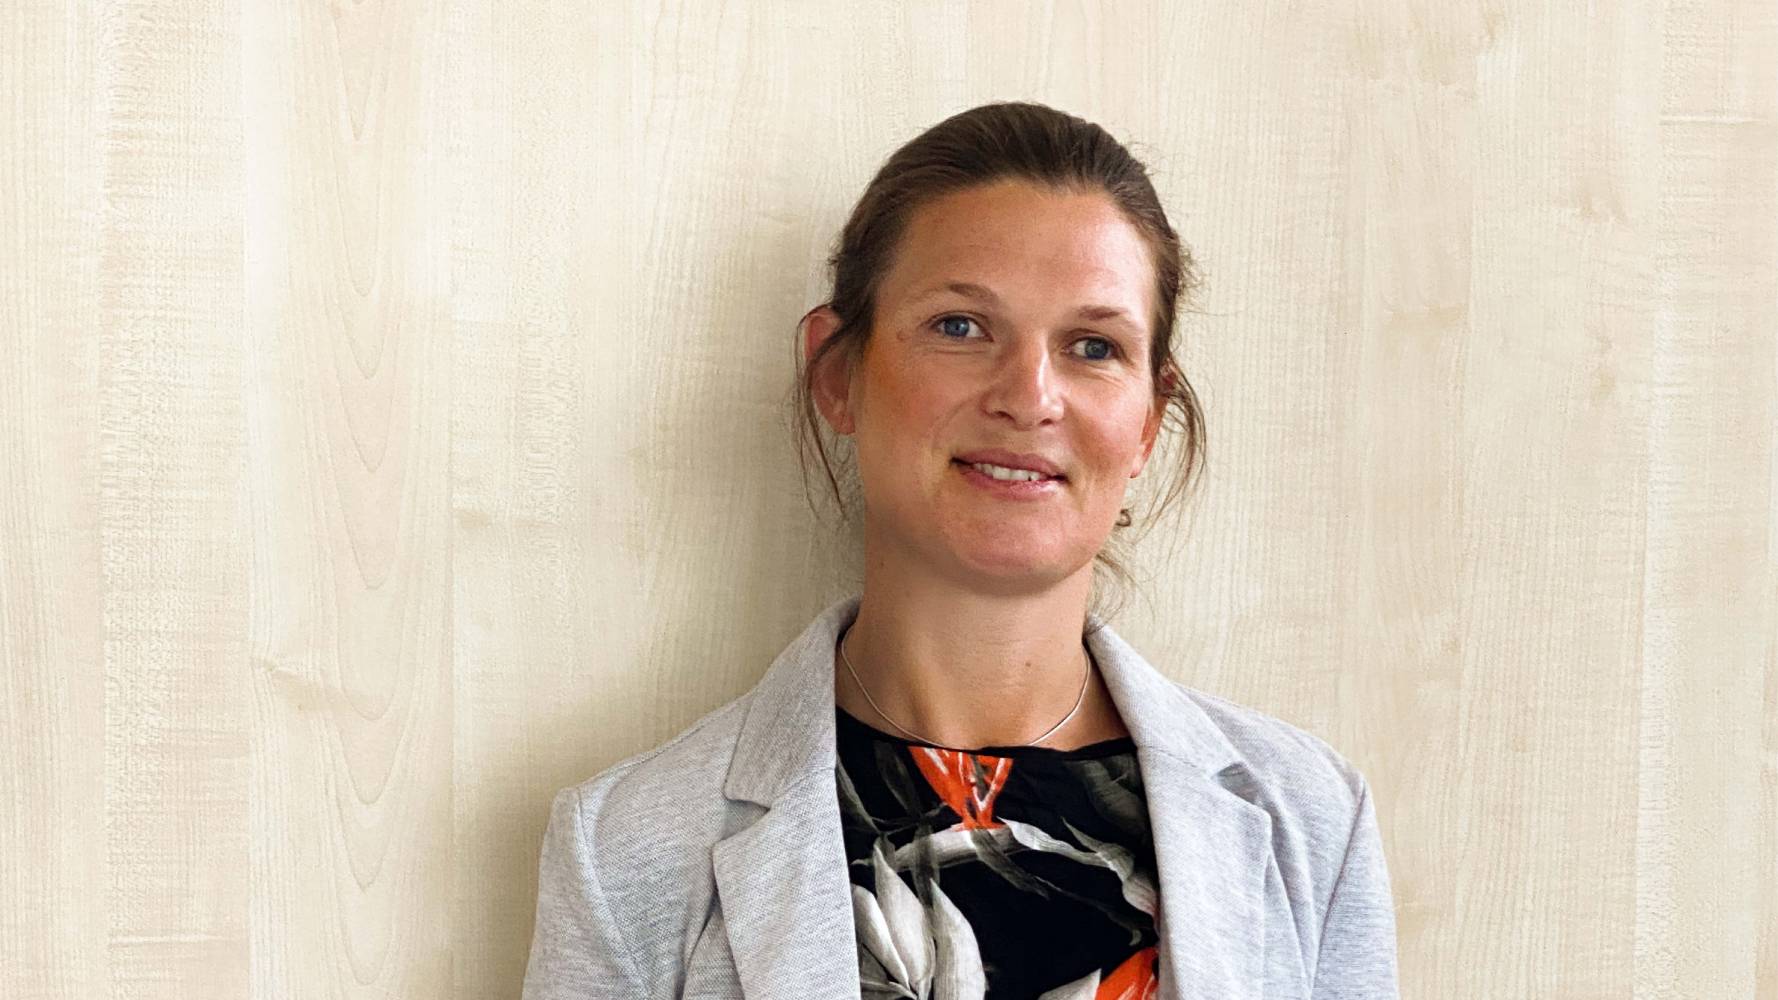 In our interview, alumna Anja Fritsch talks about the founding of her company years after graduating in Management & IT.